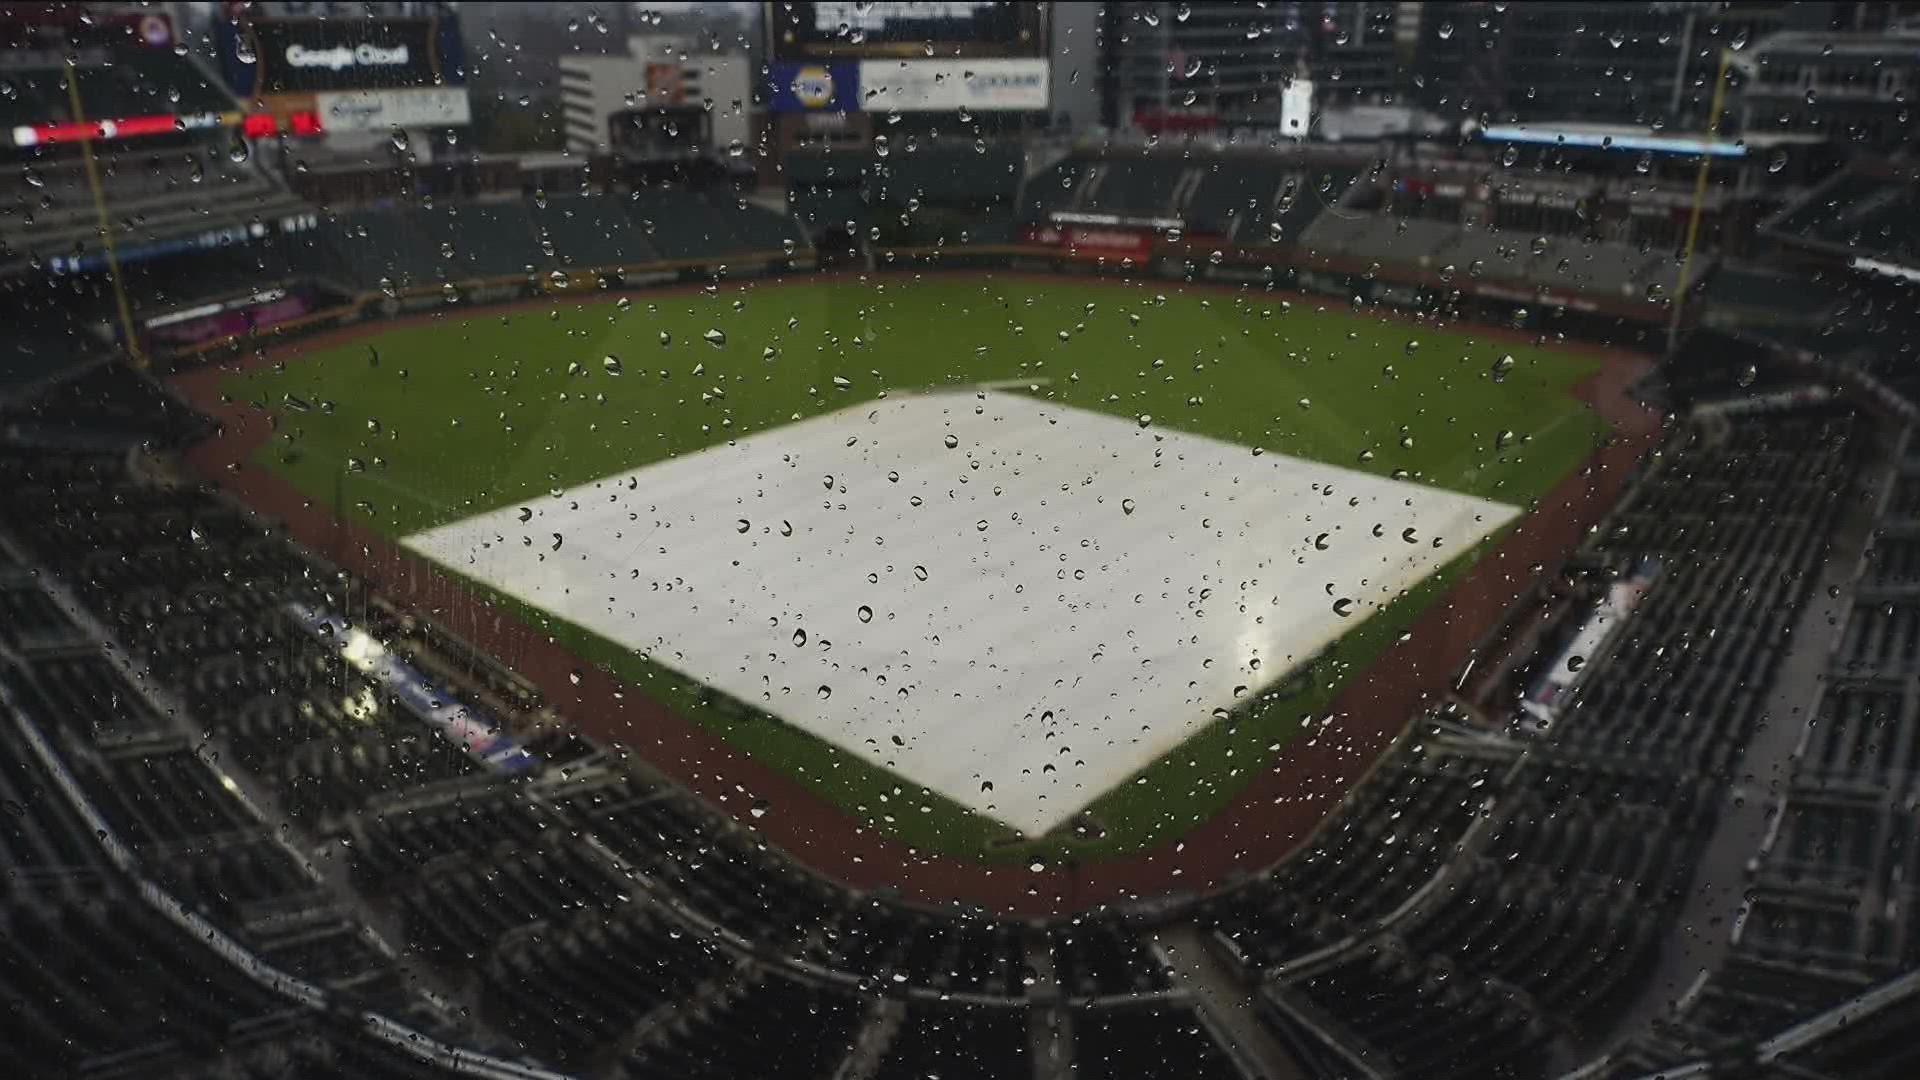 The Atlanta Braves play the Philadelphia Phillies on Wednesday in Game 2 of the NLDS. The Phillies hold a 1-0 lead in the series. First pitch has been delayed.